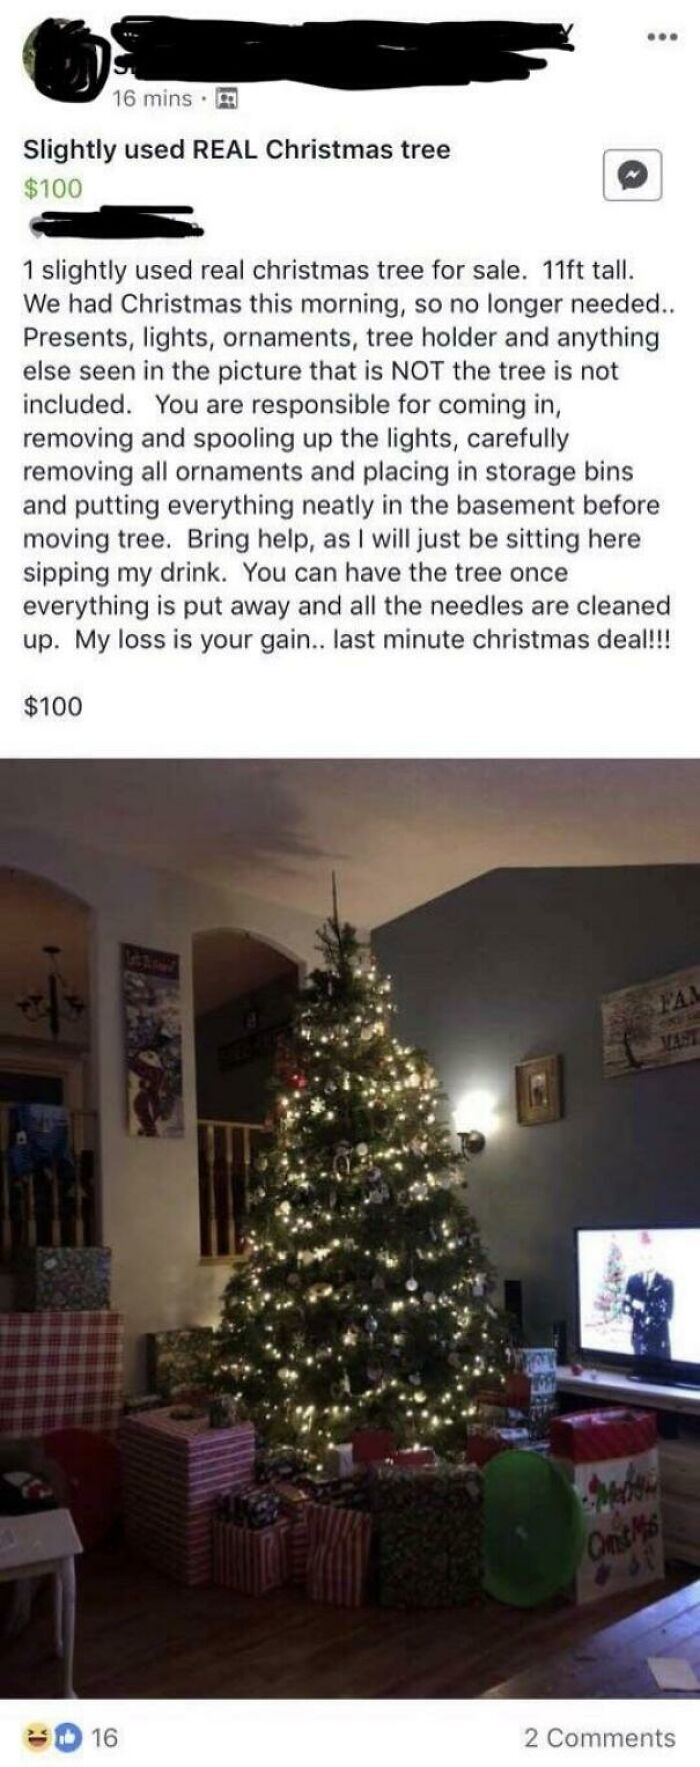 Pay Me $100 And I’ll Let You Take Down My Christmas Tree, Lights, And Ornaments While I Sit There Watching You, Sipping My Drink